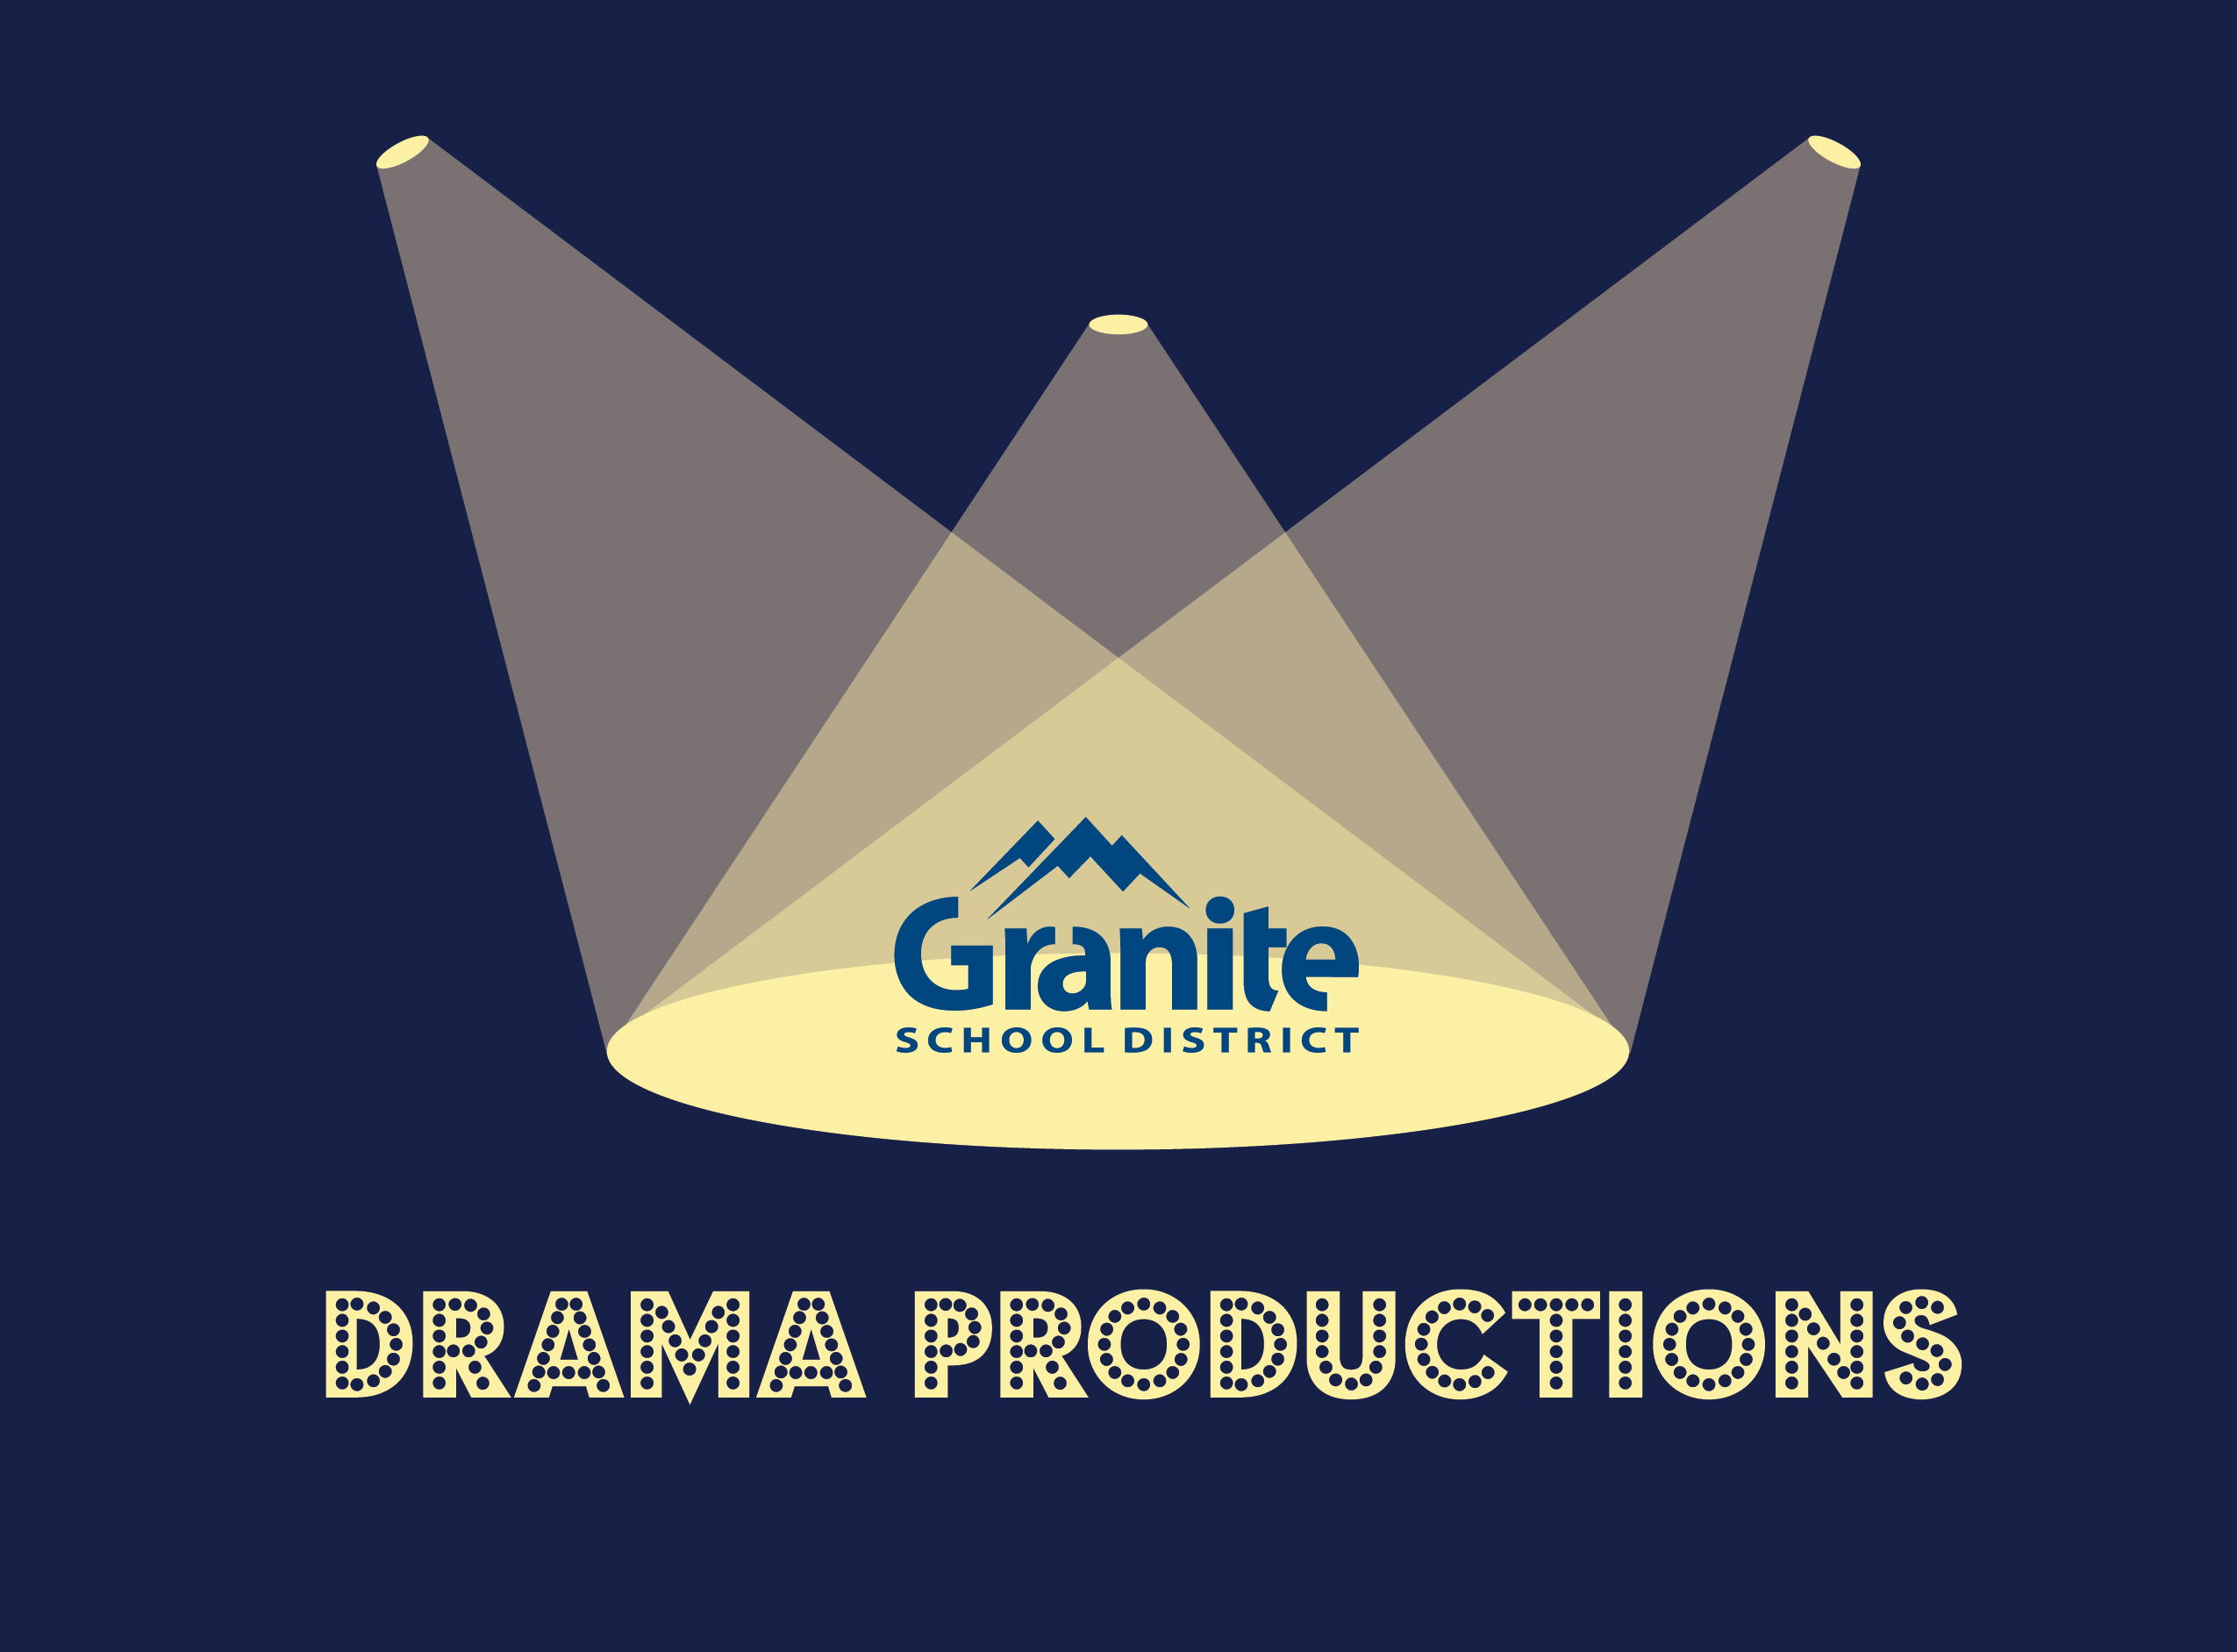 Drama performances for the 2014-2015 school year